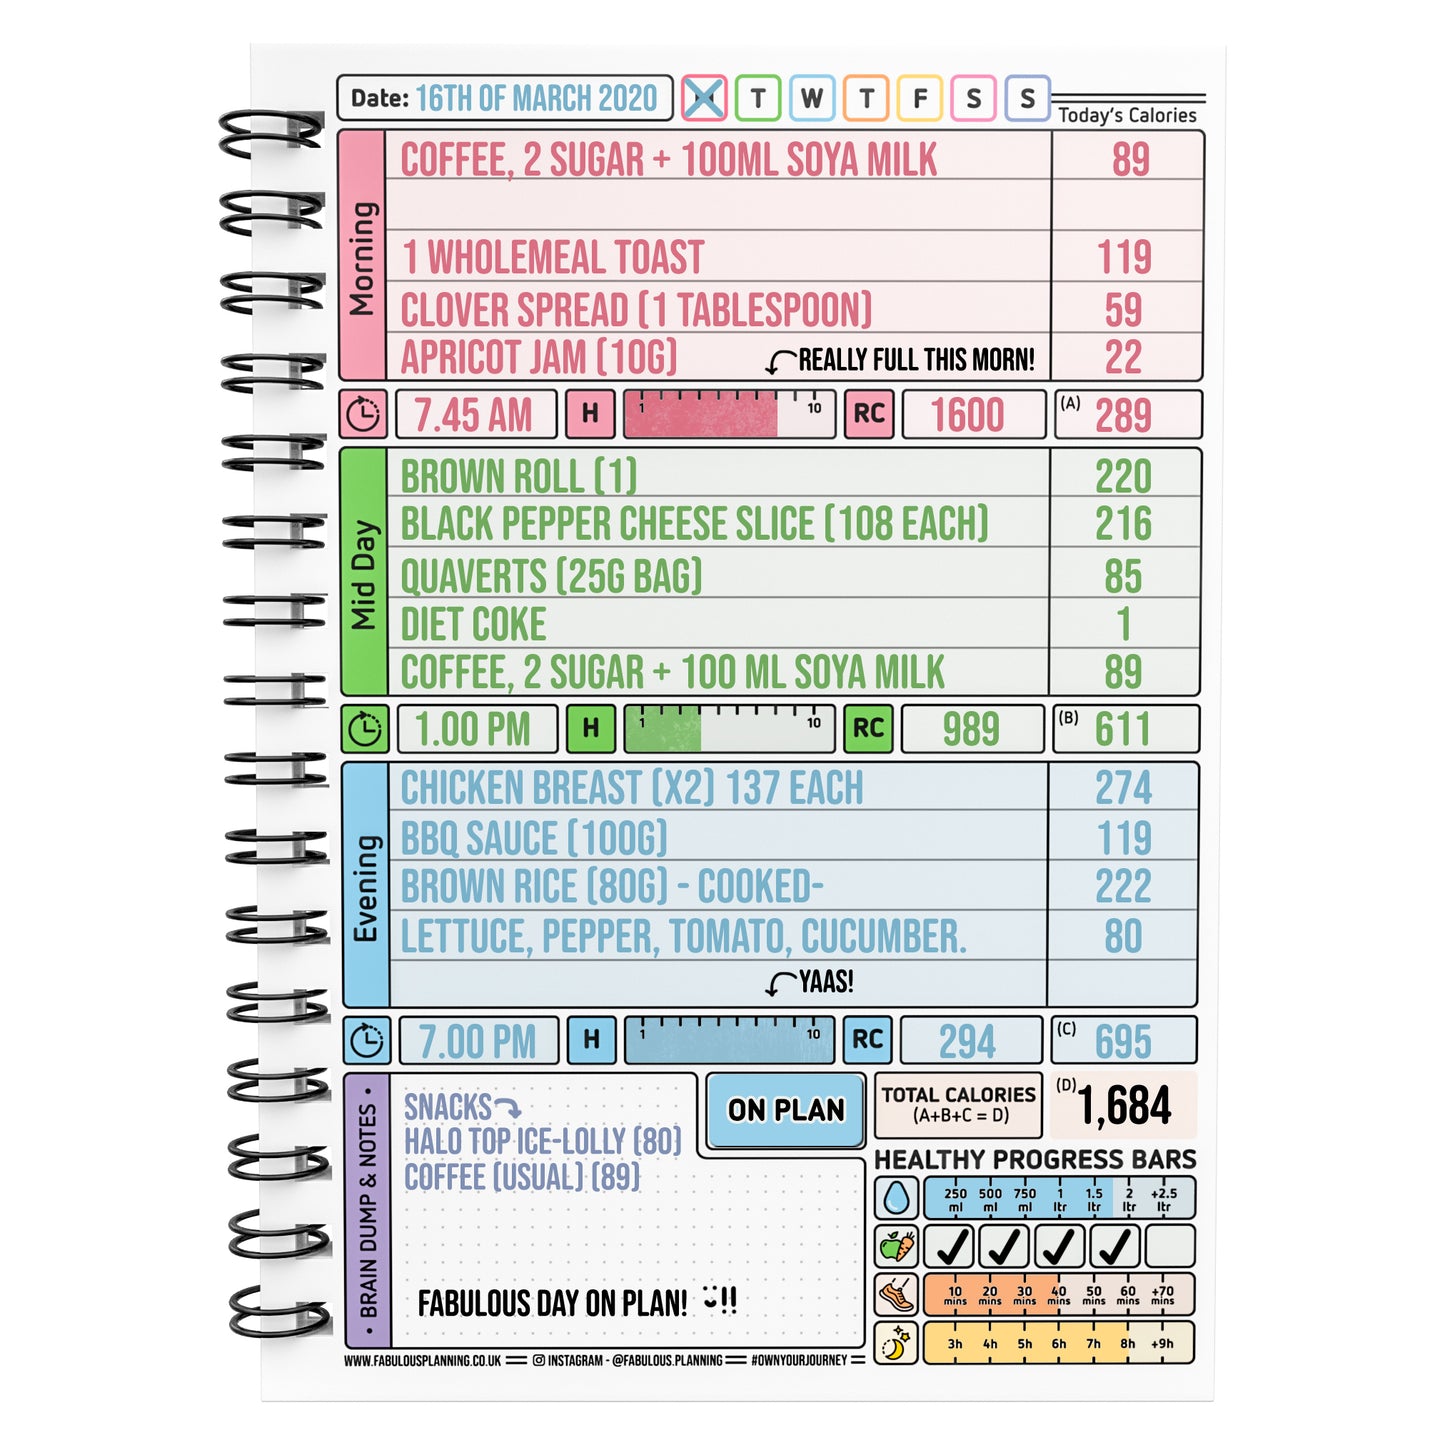 Food Diary - C10 - Calorie Counting